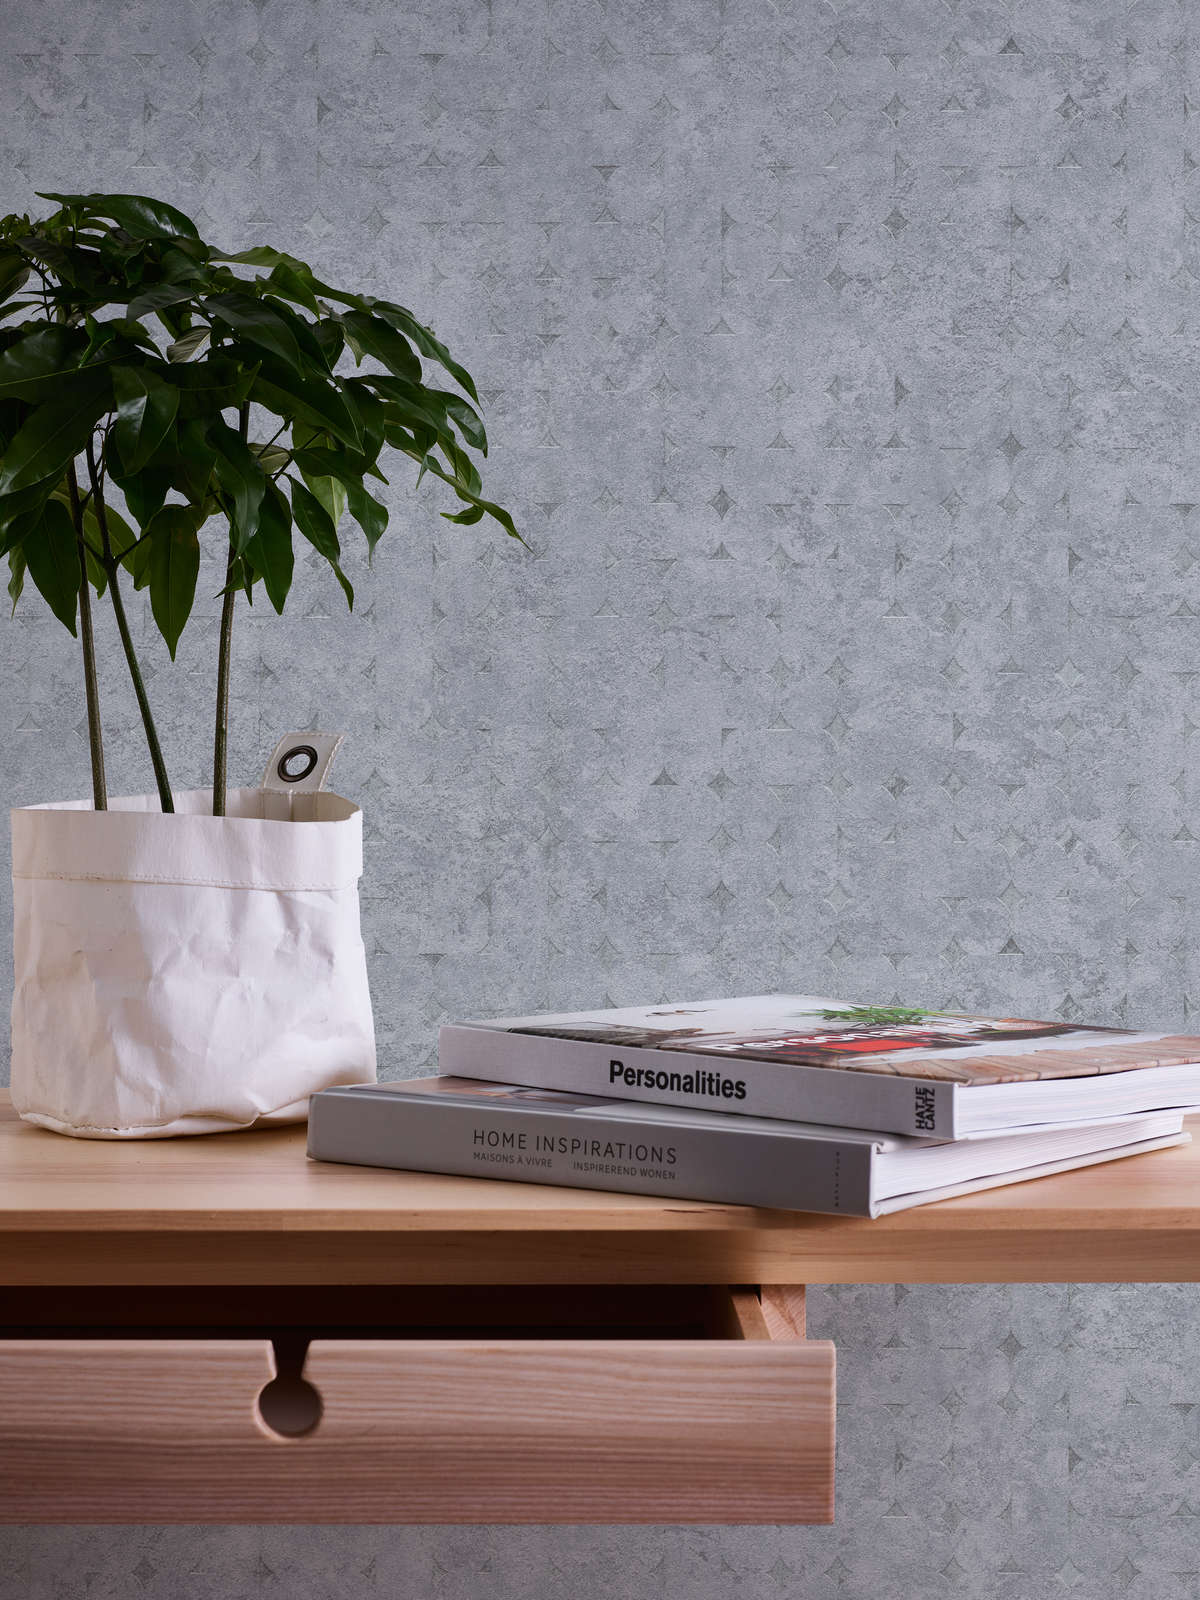             Non-woven wallpaper in one colour with structure and rough pattern - grey, silver
        